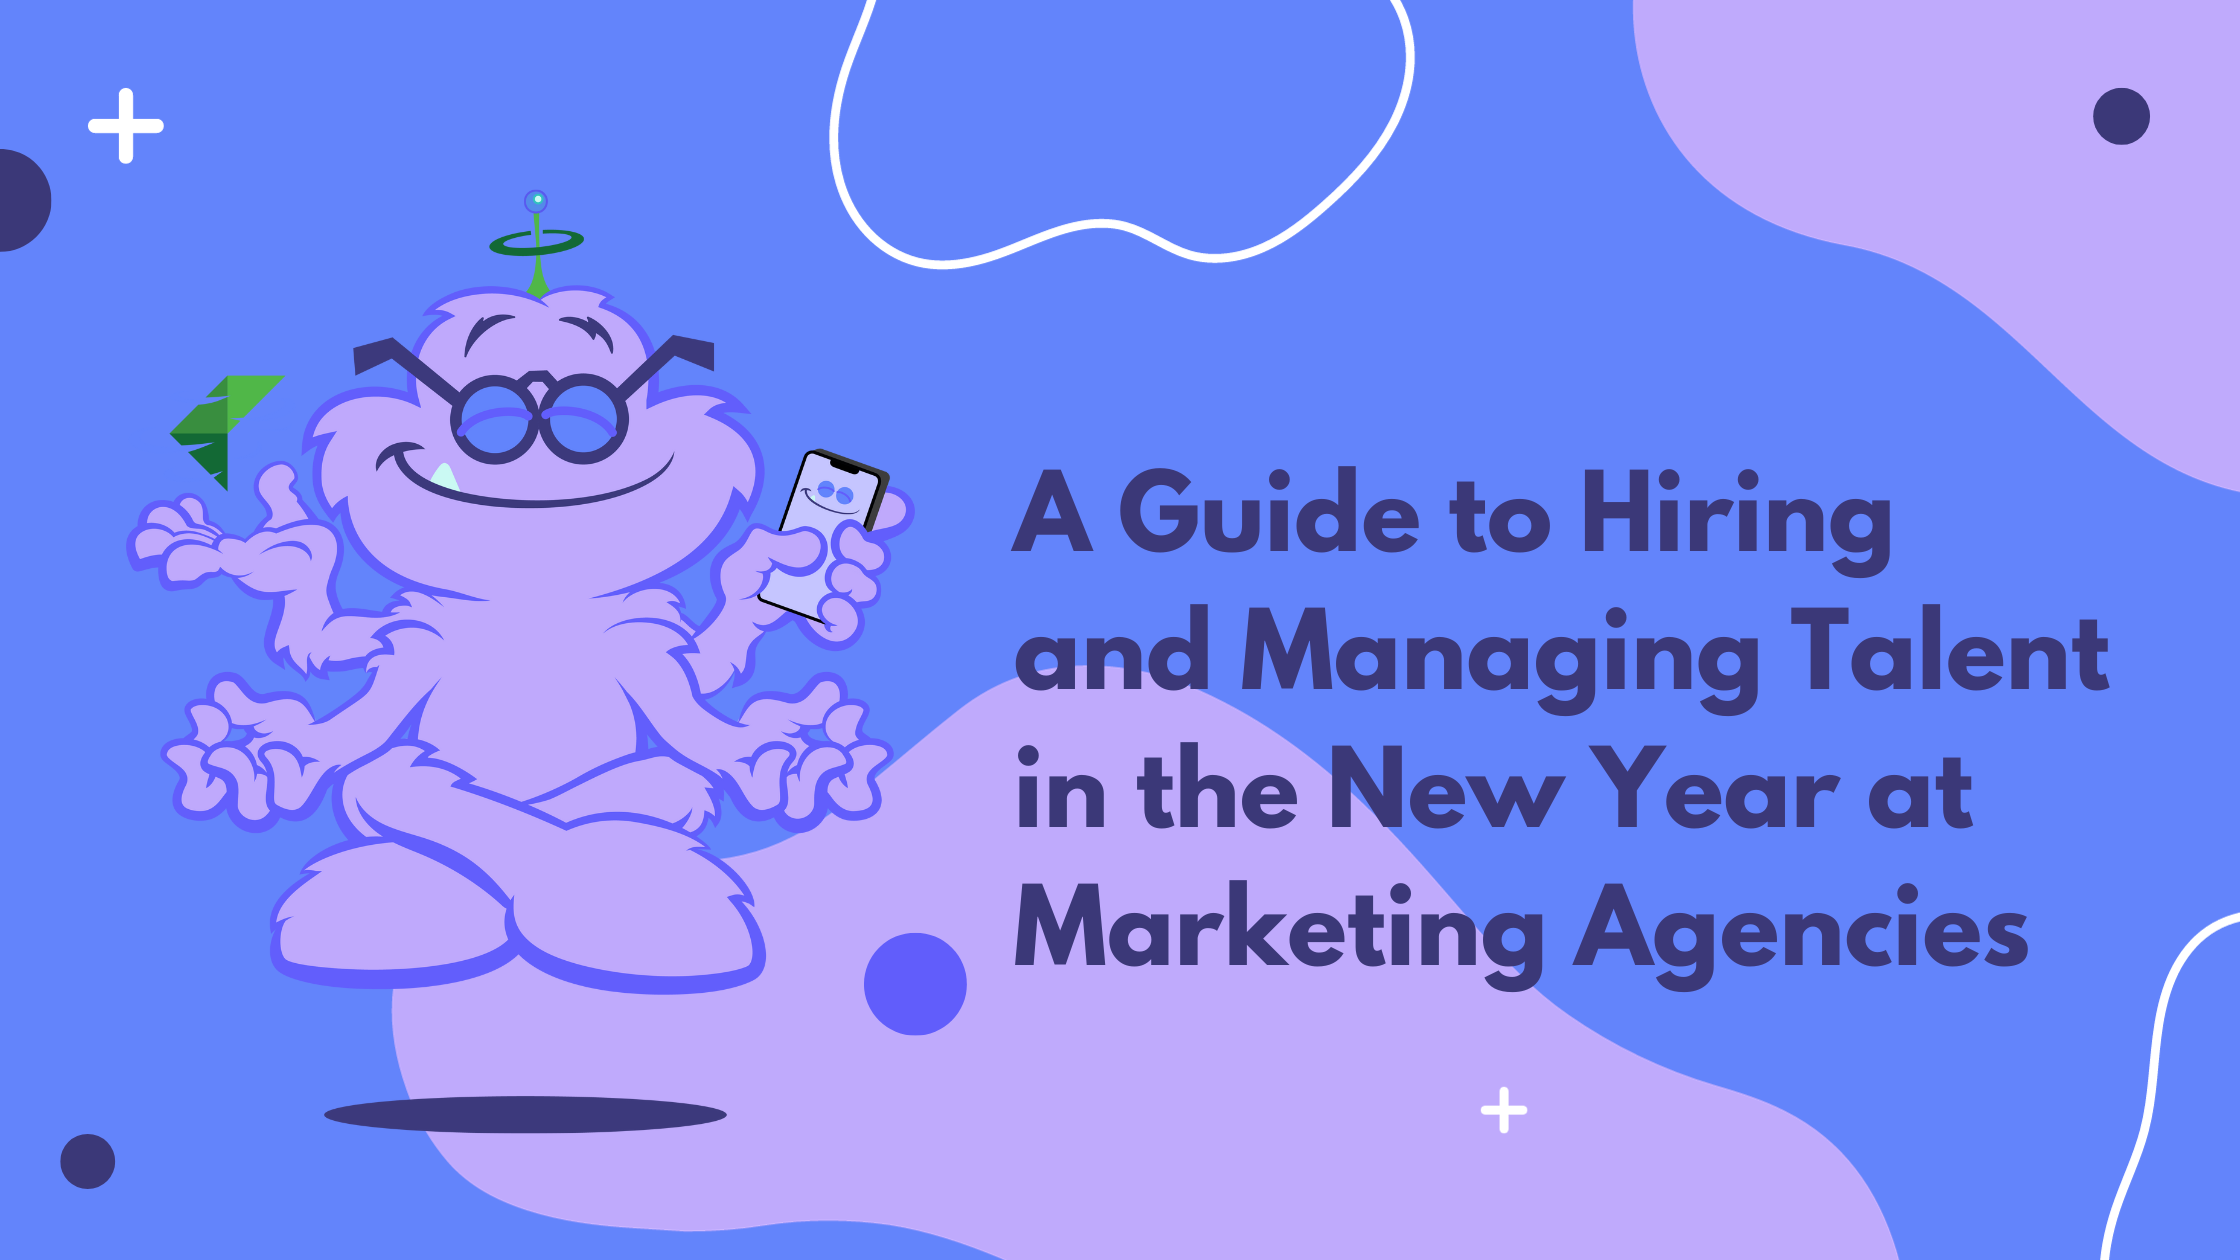 A Guide to Hiring and Managing Talent in the New Year at Marketing Agencies